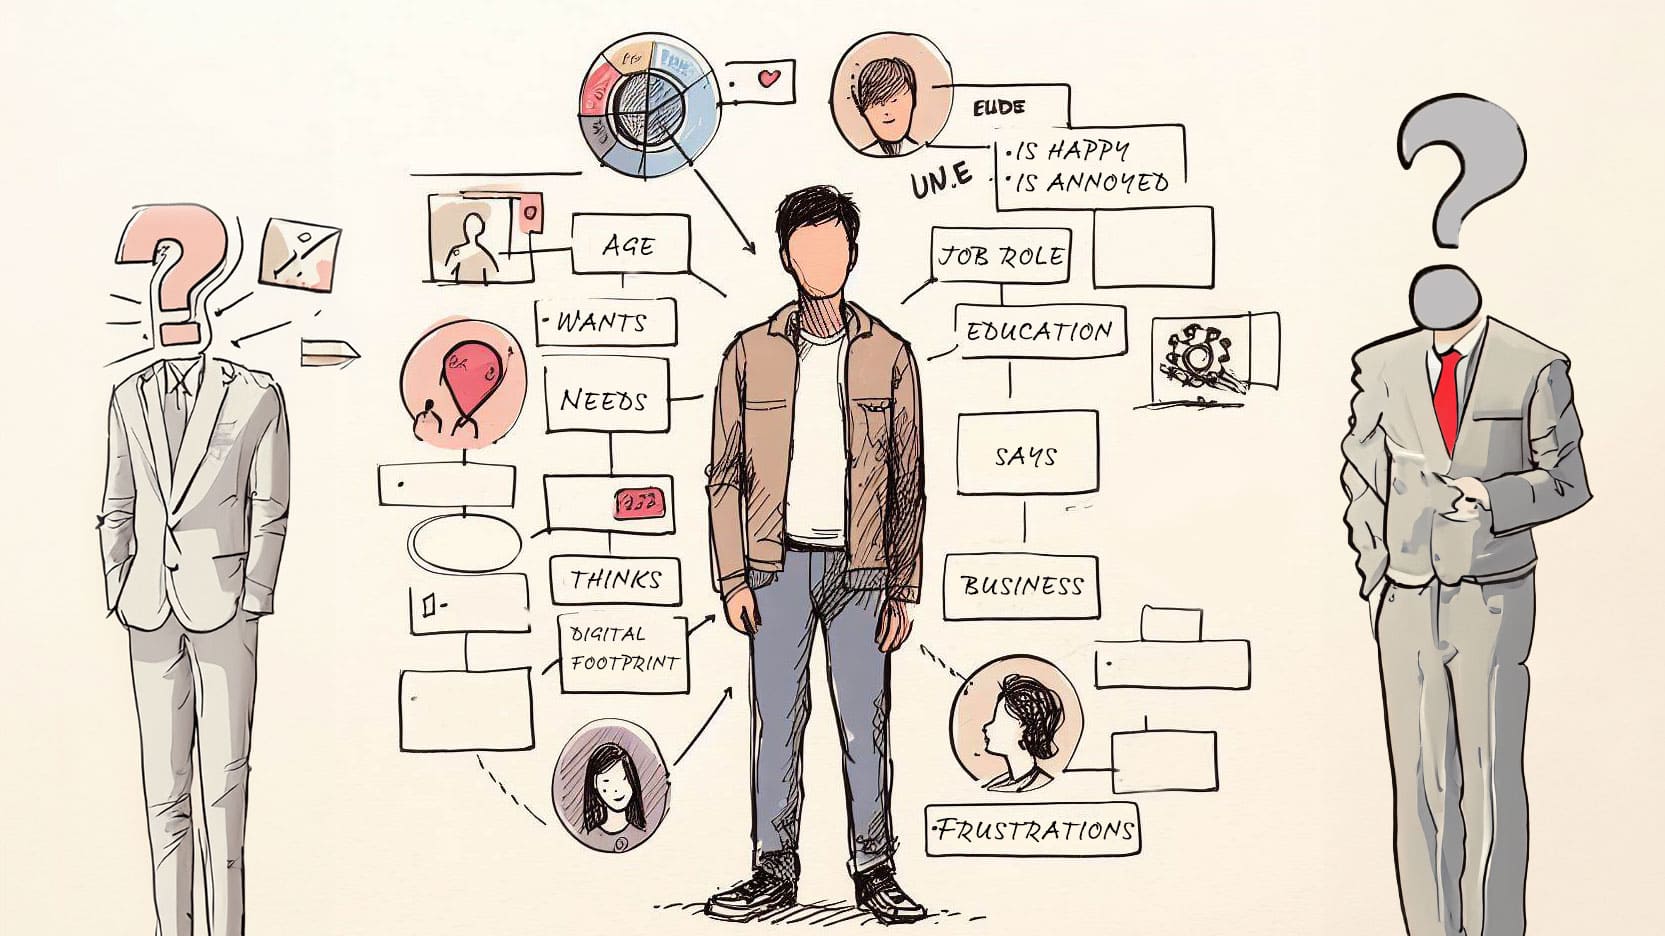  an illustration of a person surrounded by notes describing age, needs, goals and other details.